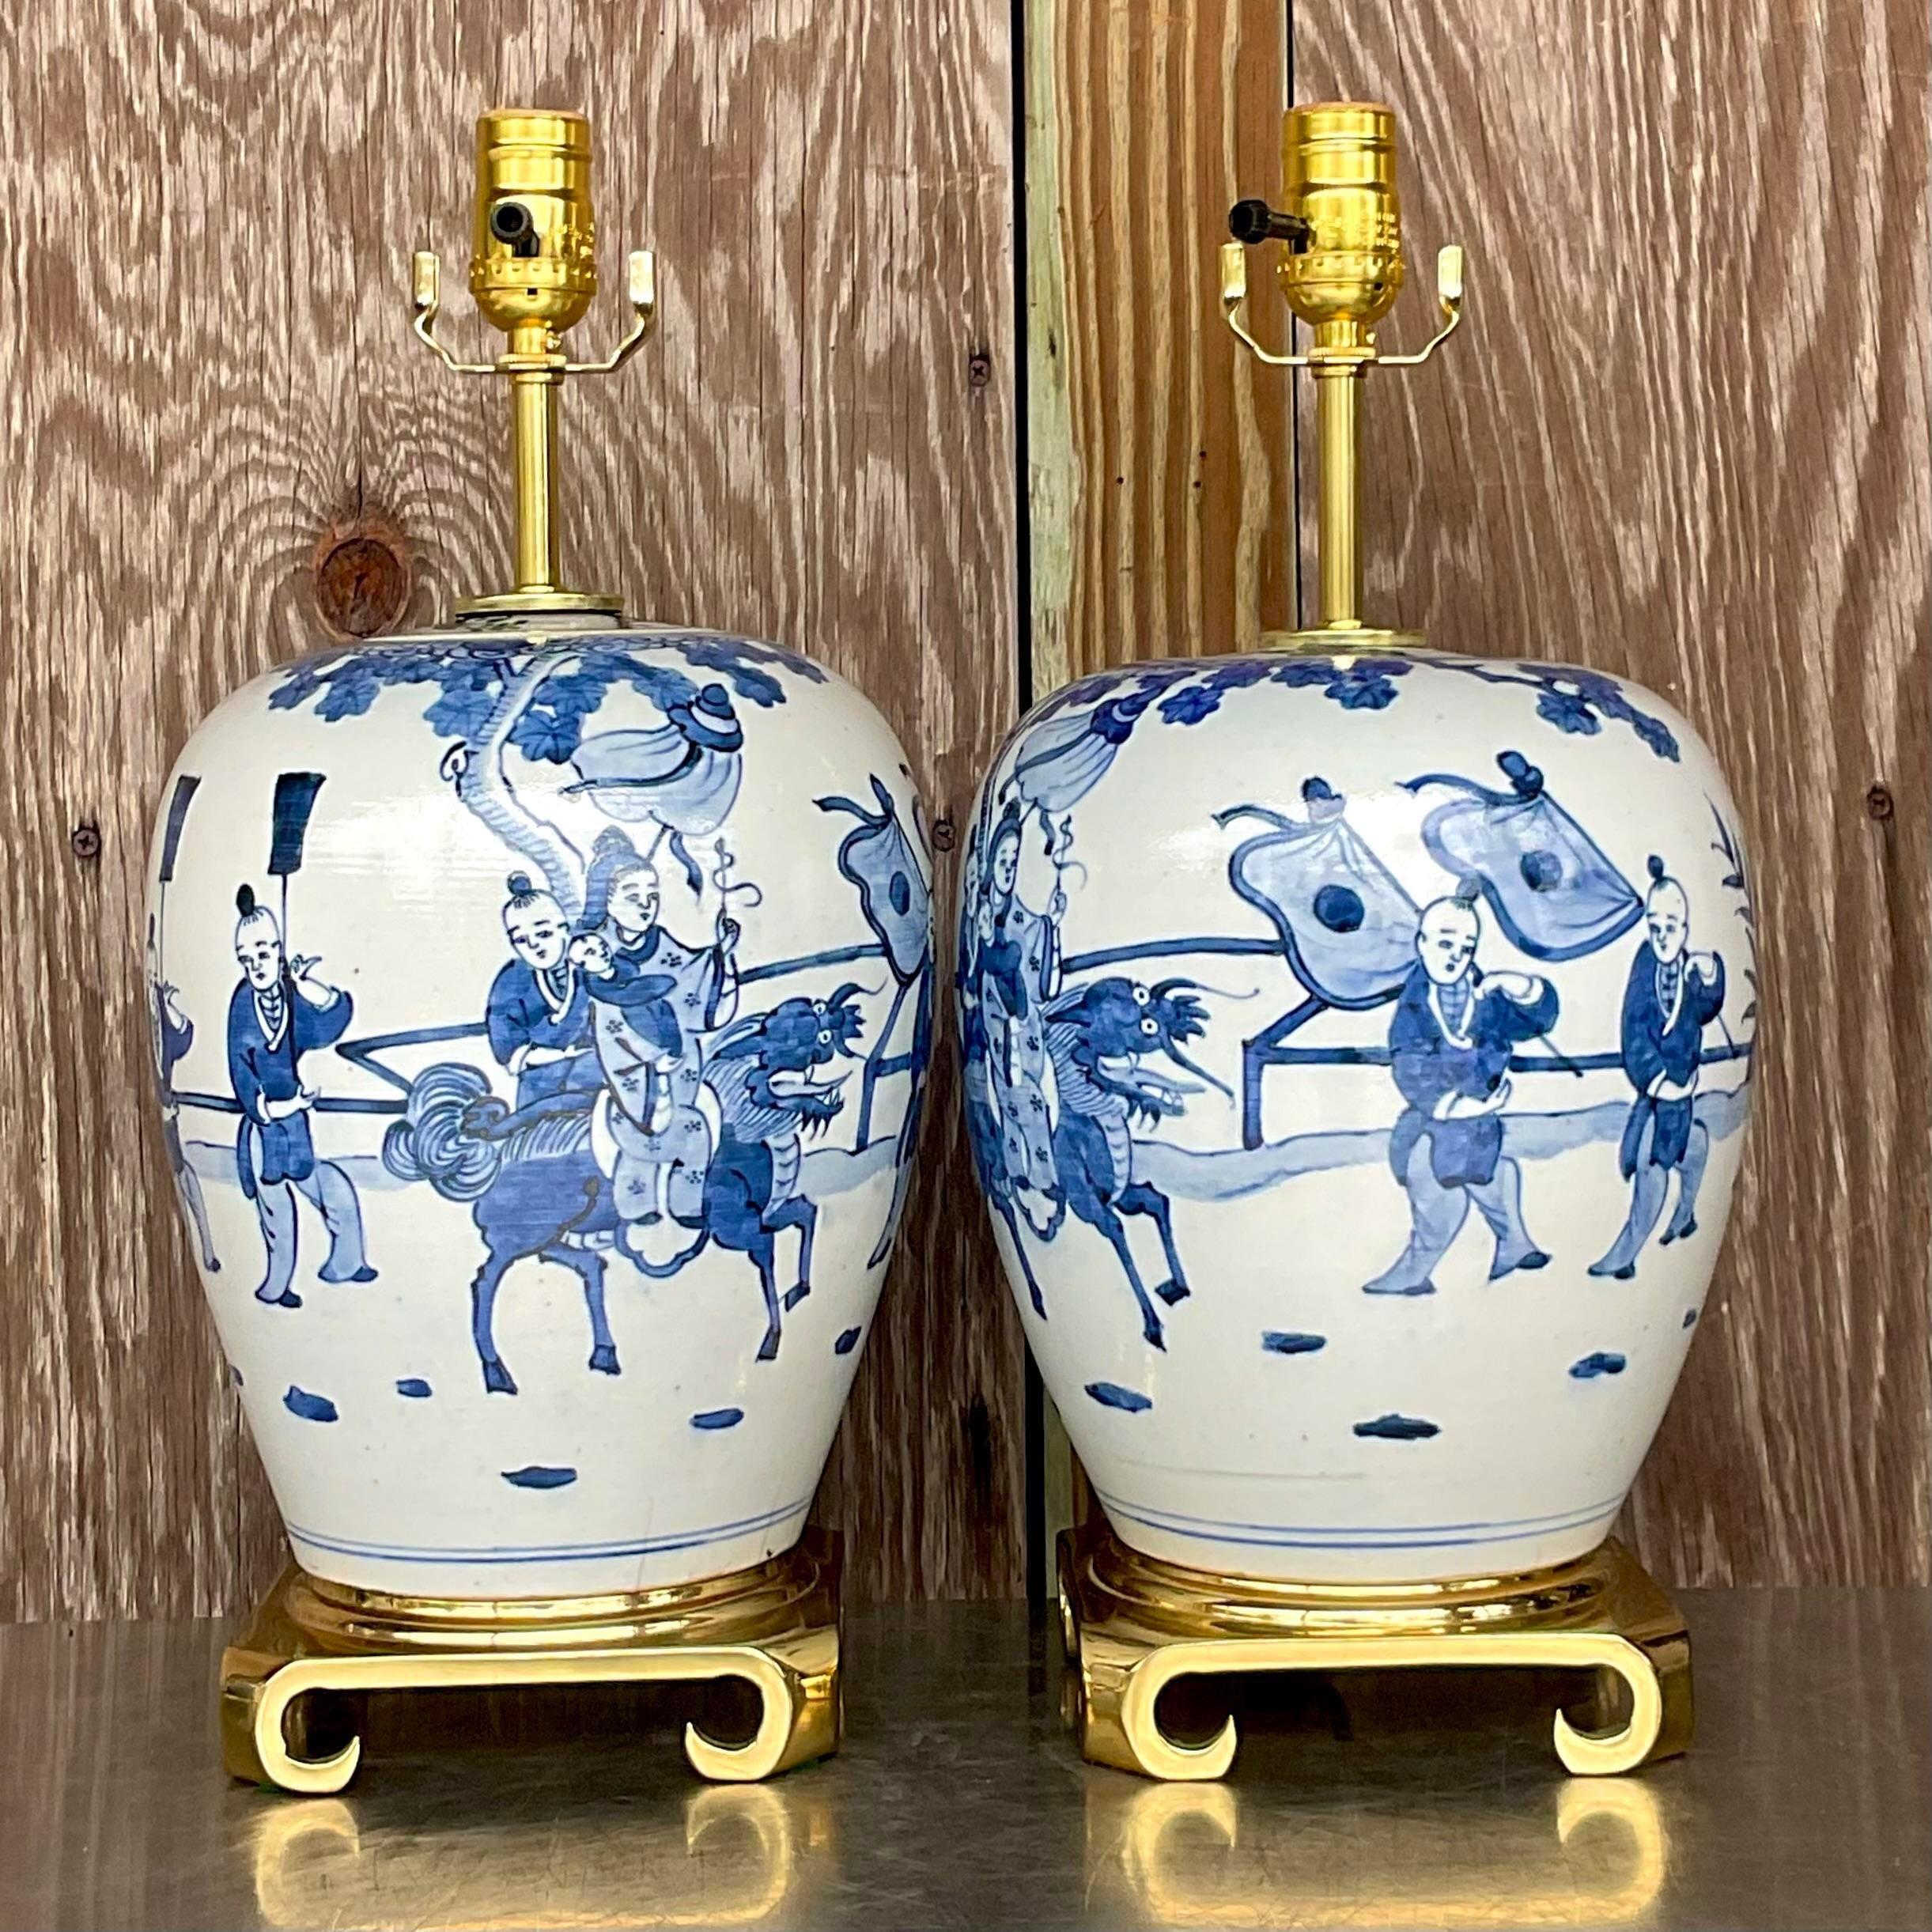 Vintage Asian Blue and White Pastoral Glazed Ceramic Lamps - a Pair In Good Condition For Sale In west palm beach, FL